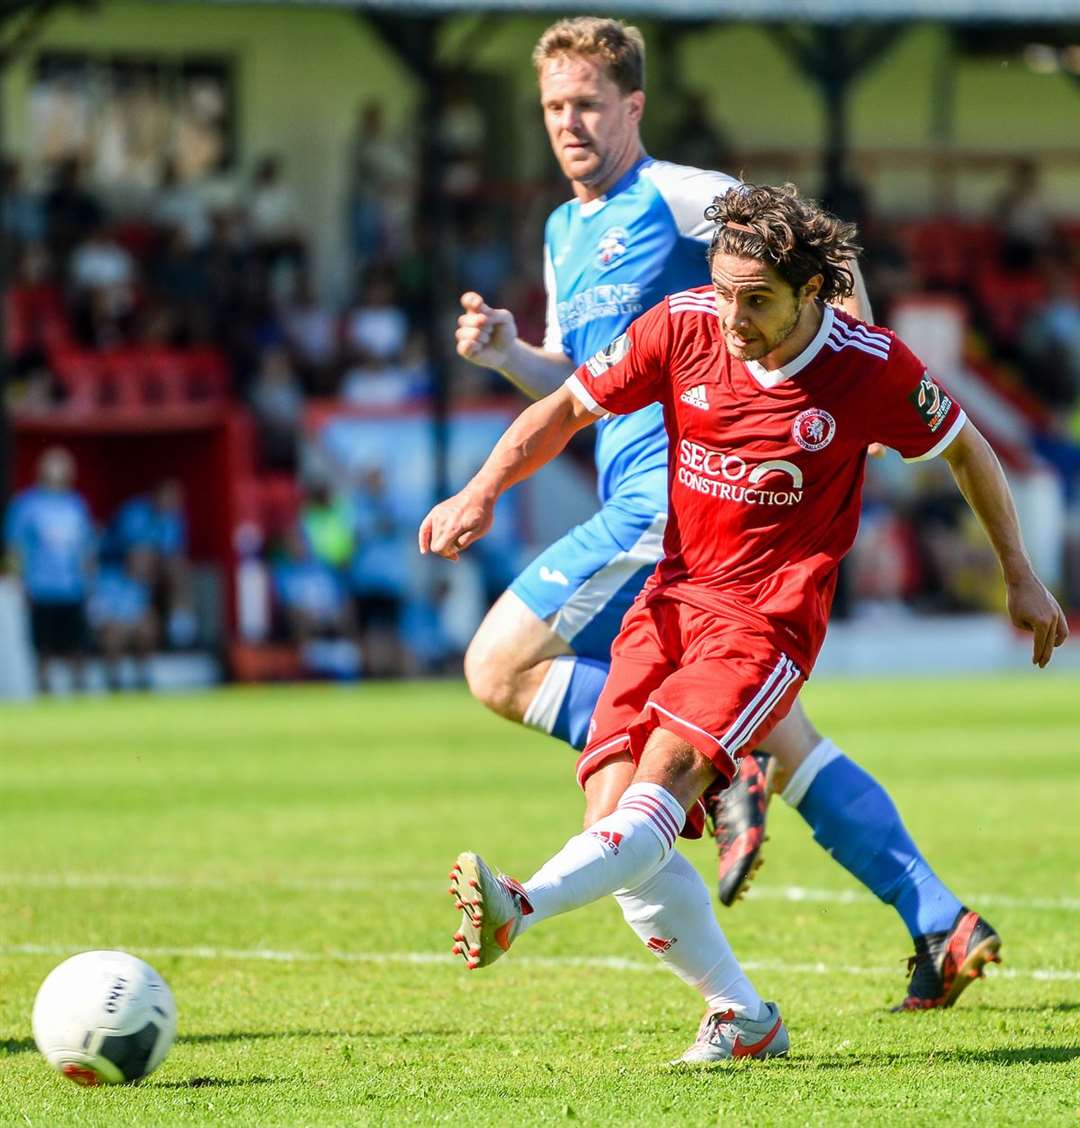 Welling's Bradley Goldberg puts his side ahead against Tonbridge. Picture: Dave Budden